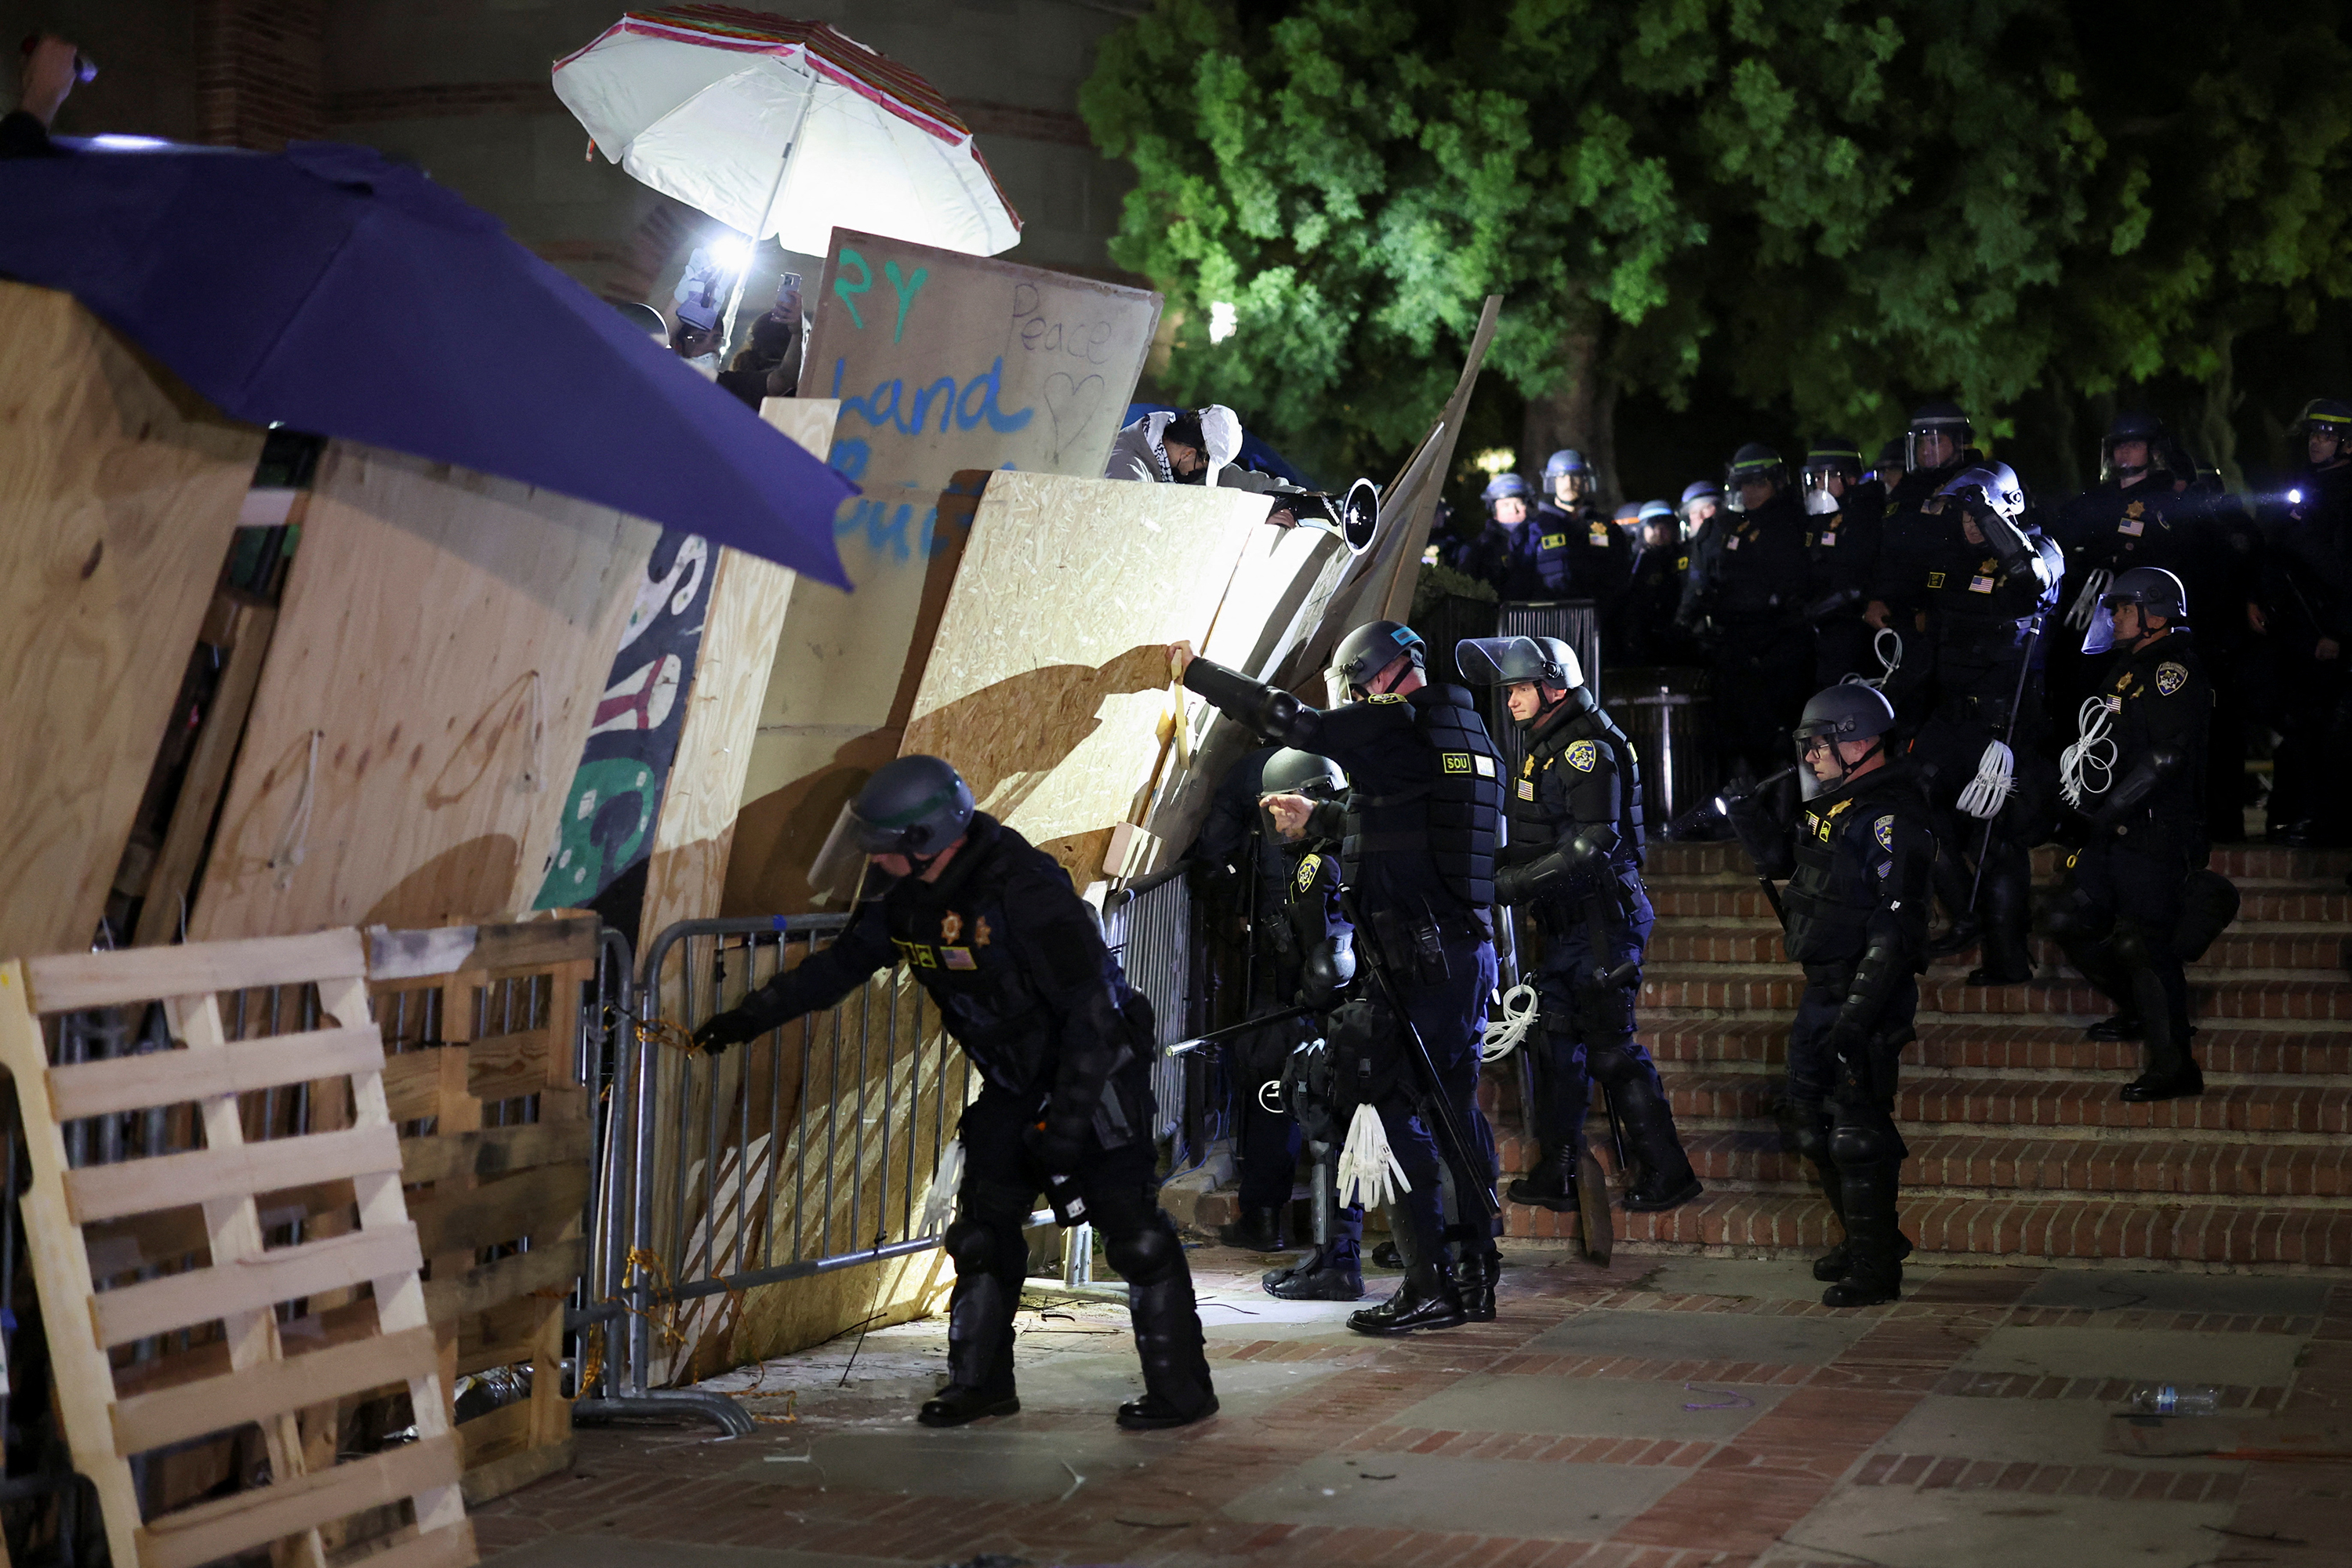 Police take down the barricade around the encampment at the University of California, Los Angeles campus on May 2. 